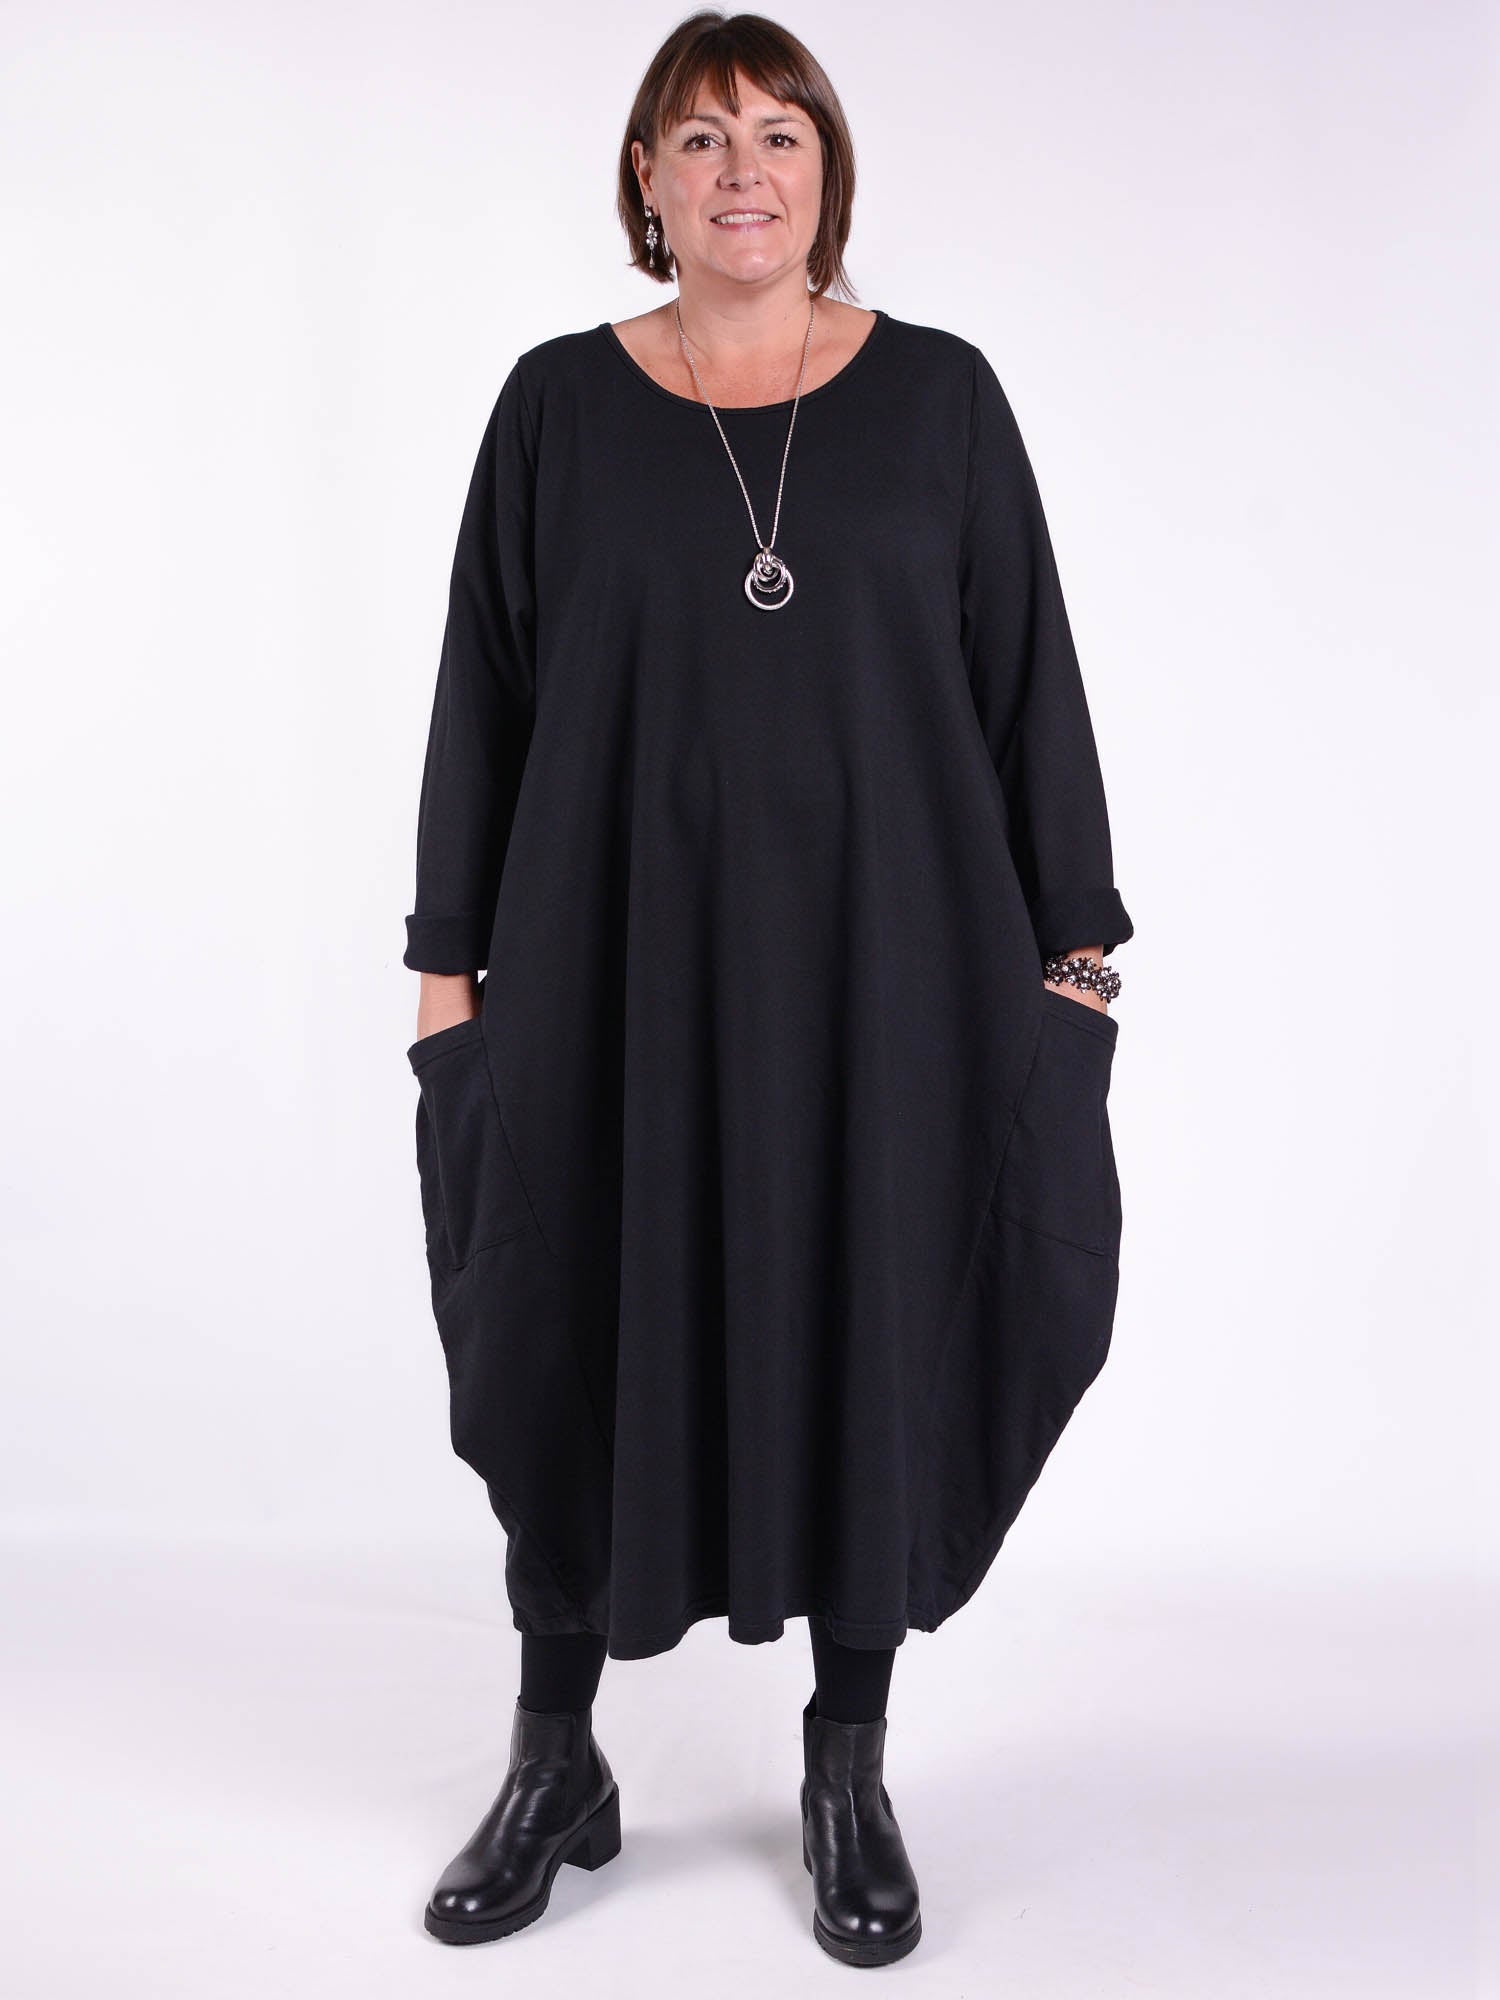 Lagenlook Long Dress with Pockets - 9215 Plain, Dresses, Pure Plus Clothing, Lagenlook Clothing, Plus Size Fashion, Over 50 Fashion